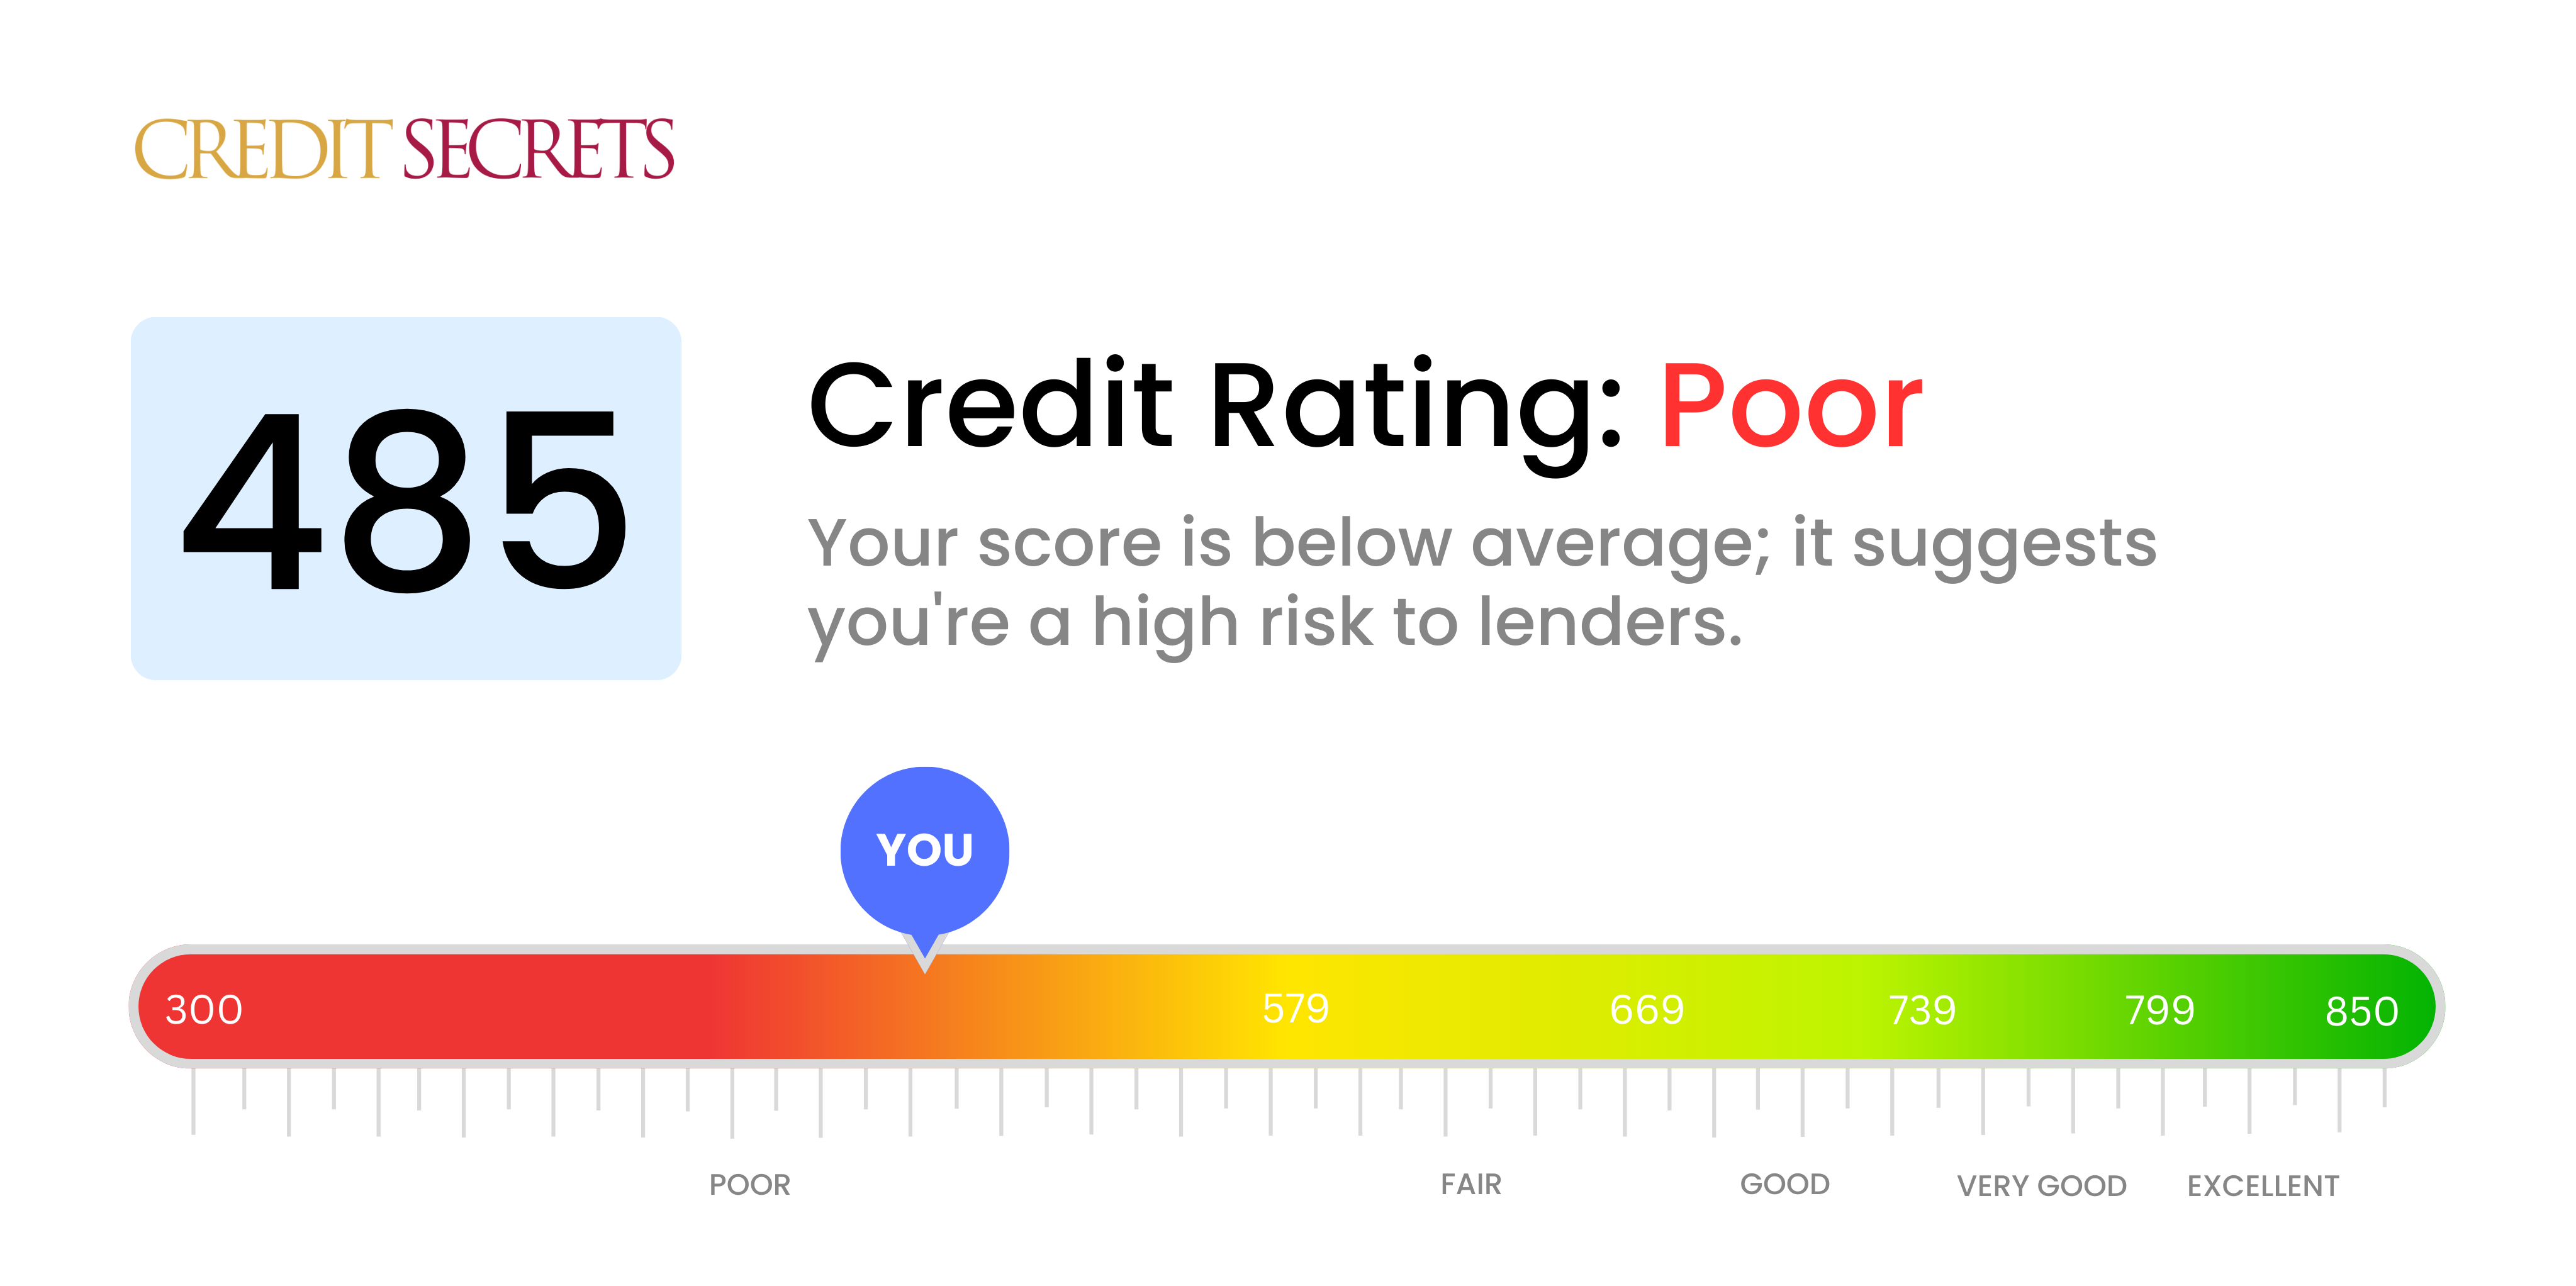 Is 485 a good credit score?